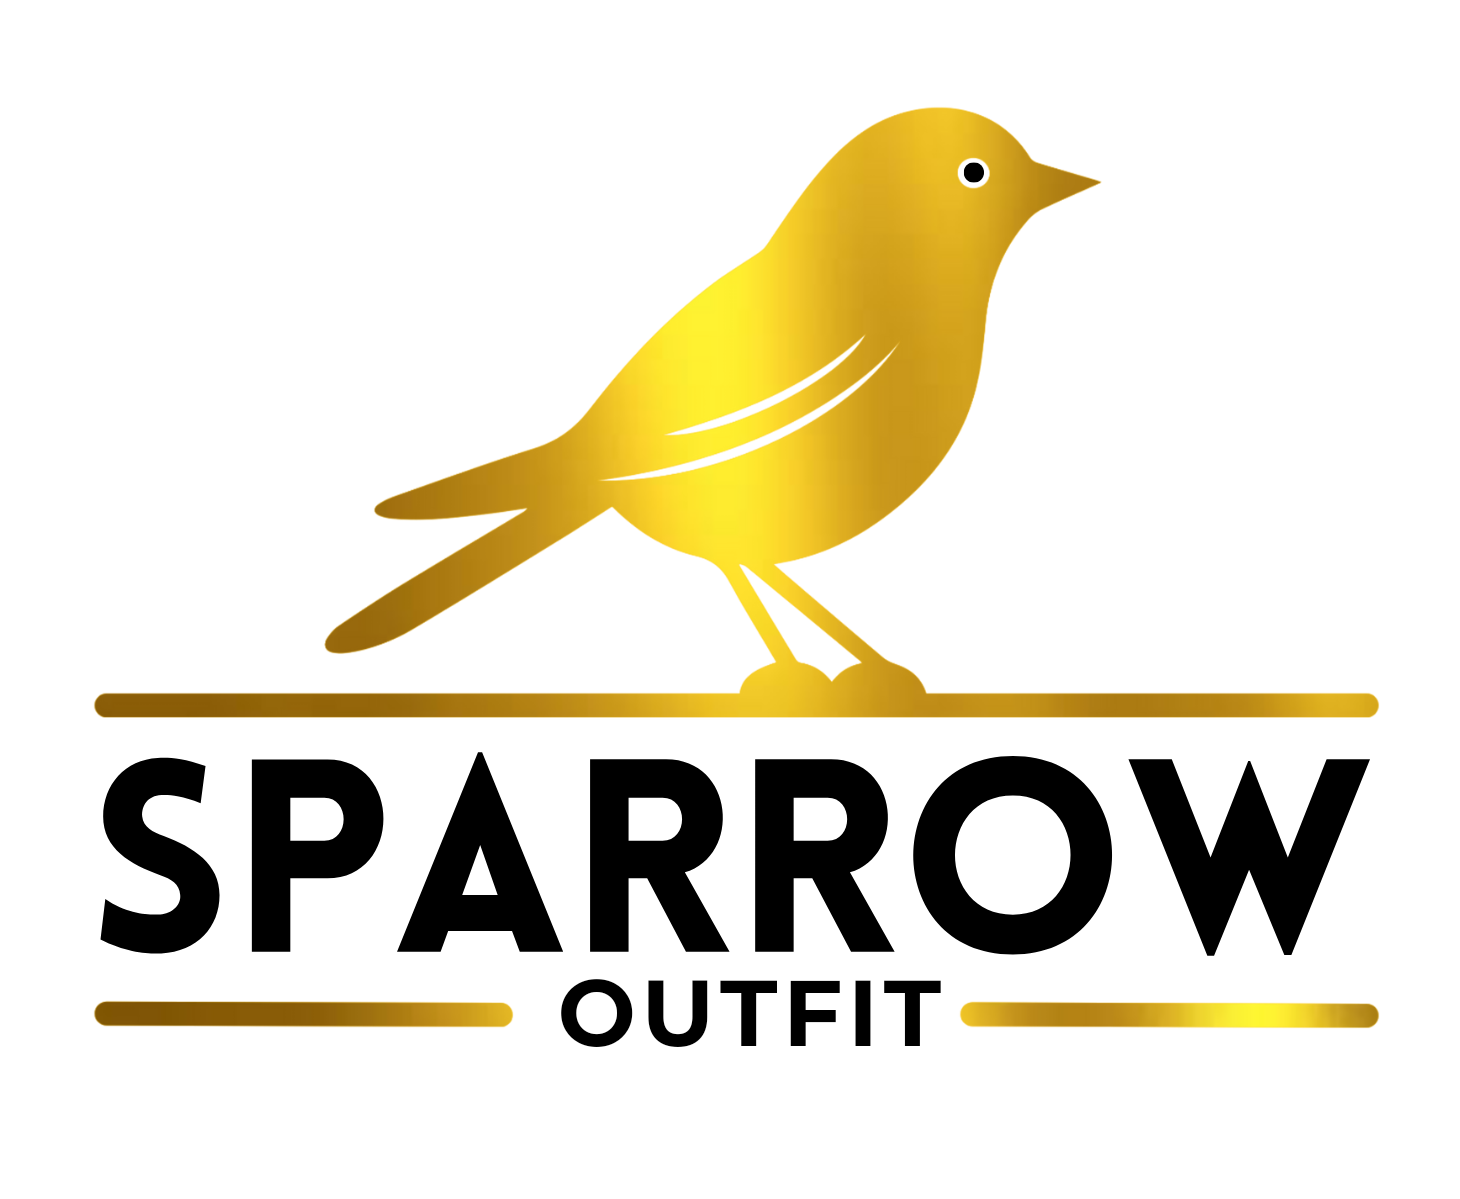 Sparrow outfit